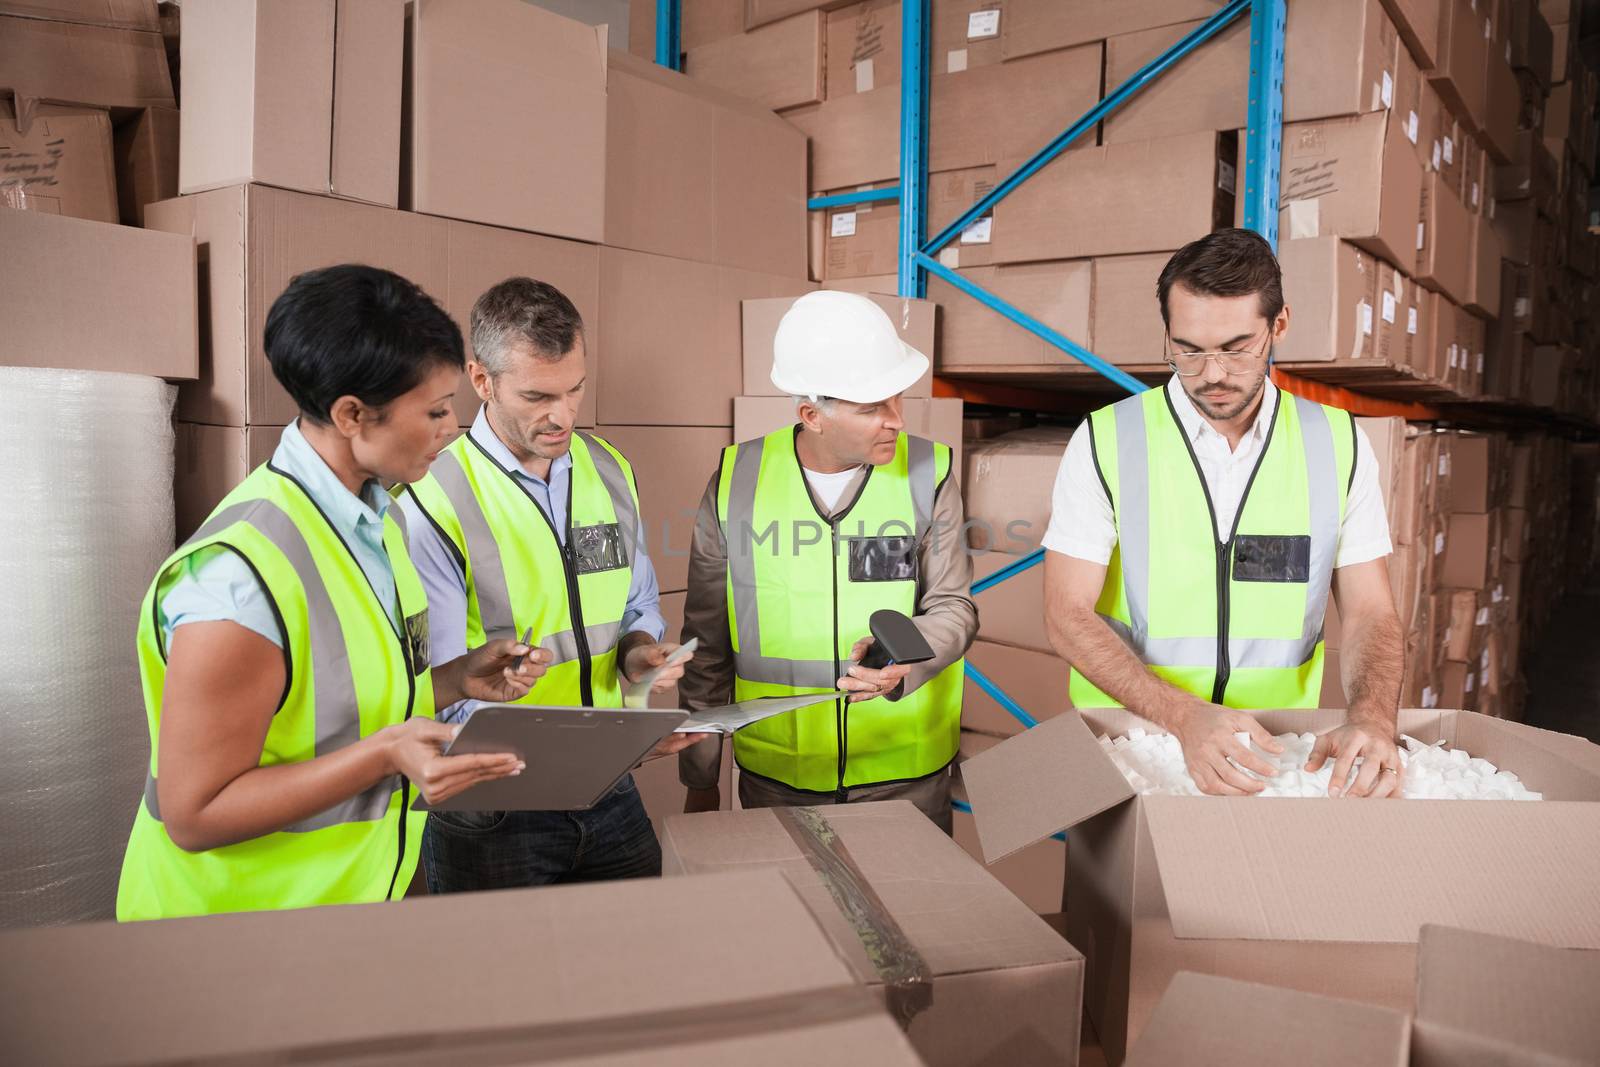 Warehouse team working during busy period